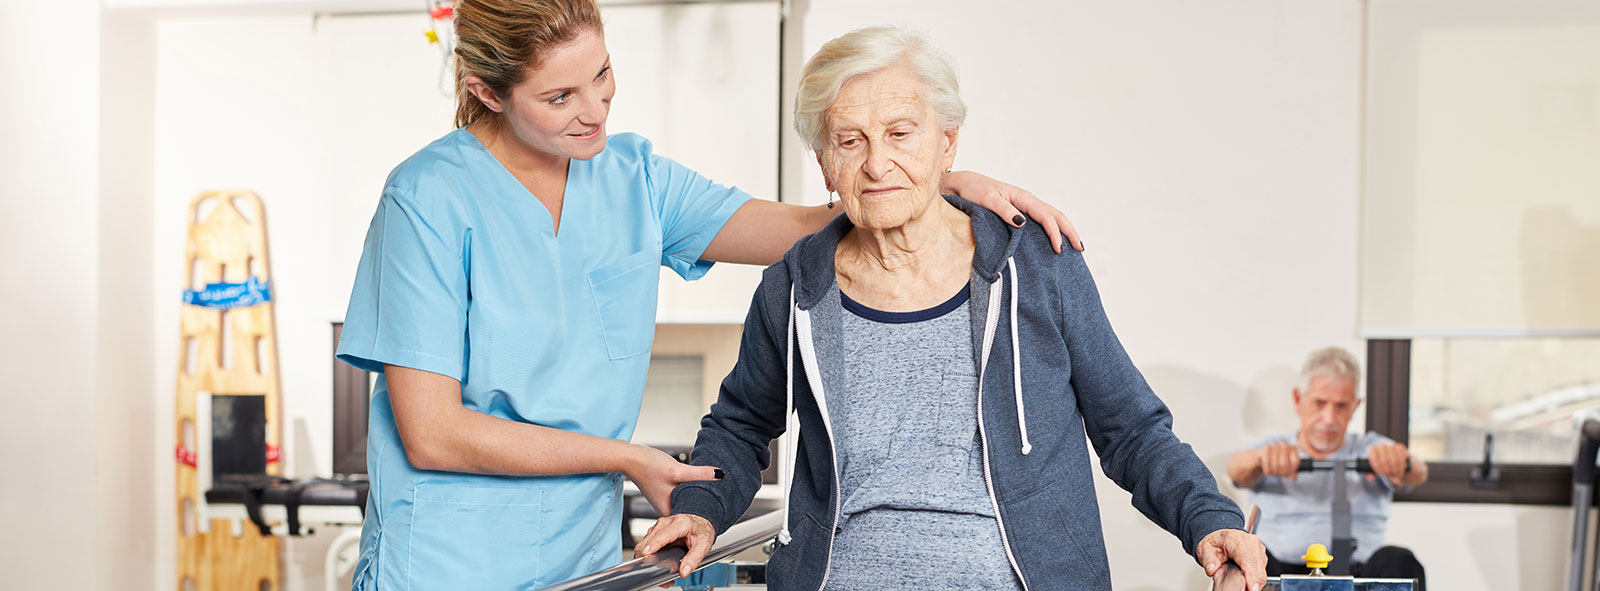 Rehabilitation therapist supports senior woman on treadmill in physiotherapy.